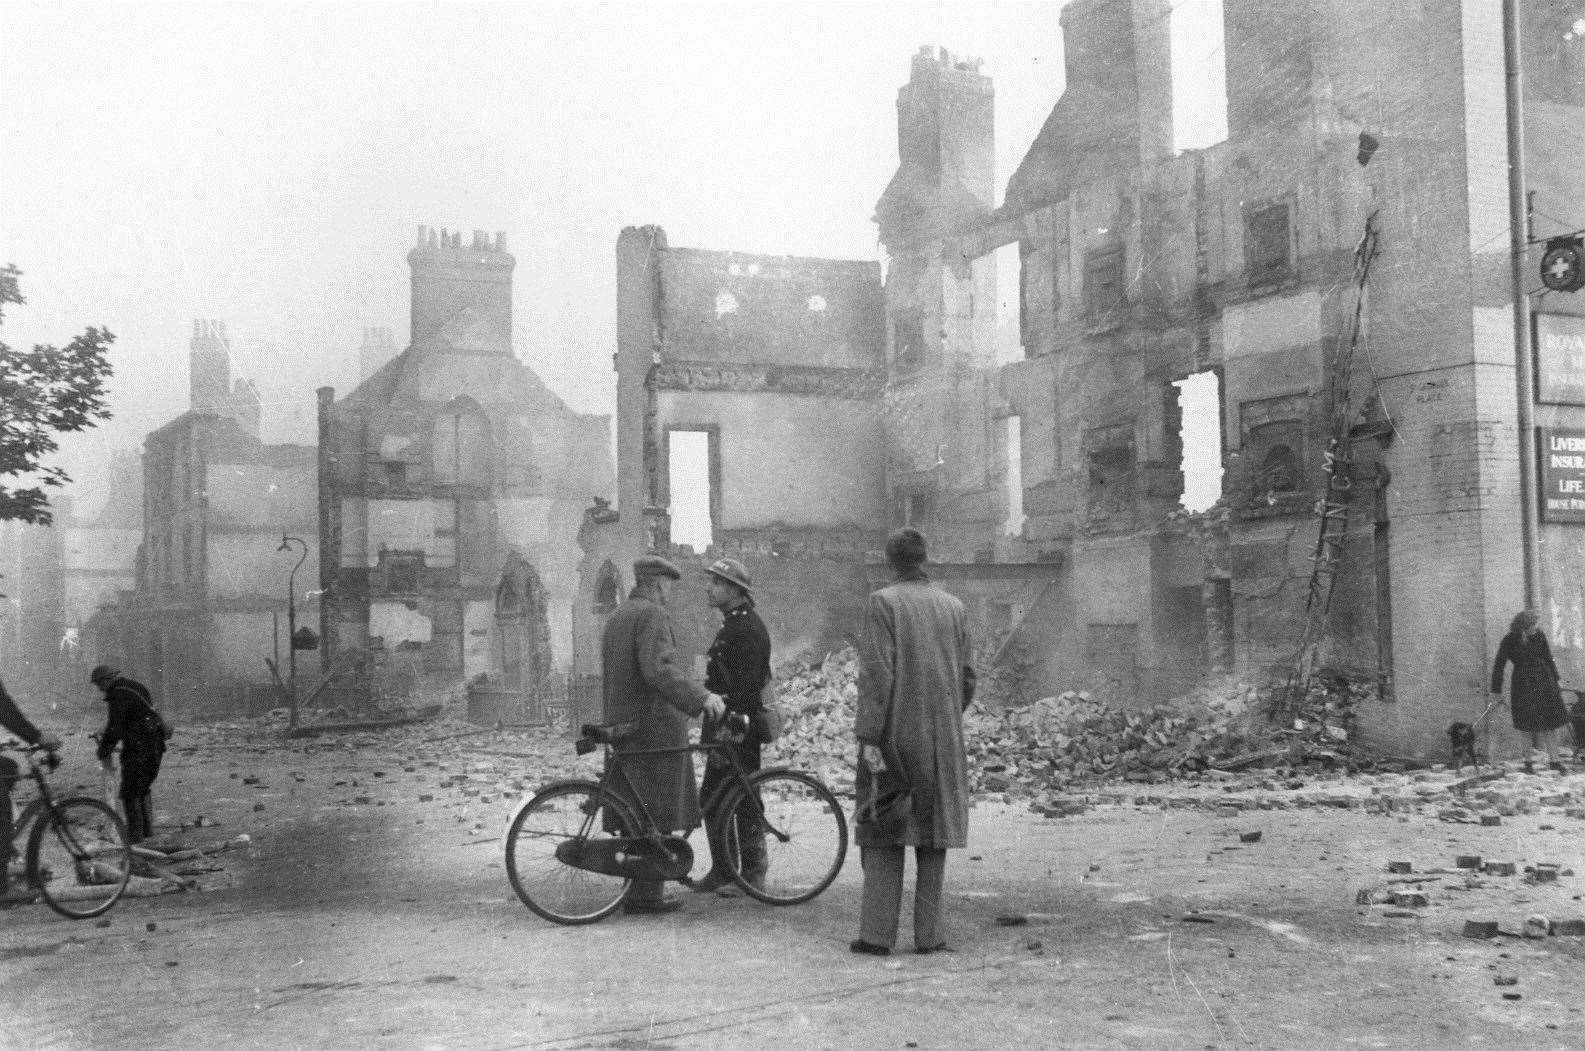 A policeman at the top end of St George's Place warns people of a suspected unexploded bomb after the June 1942 Blitz of Canterbury. Behind are the ruins of Regency buildings that were left to burn unattended